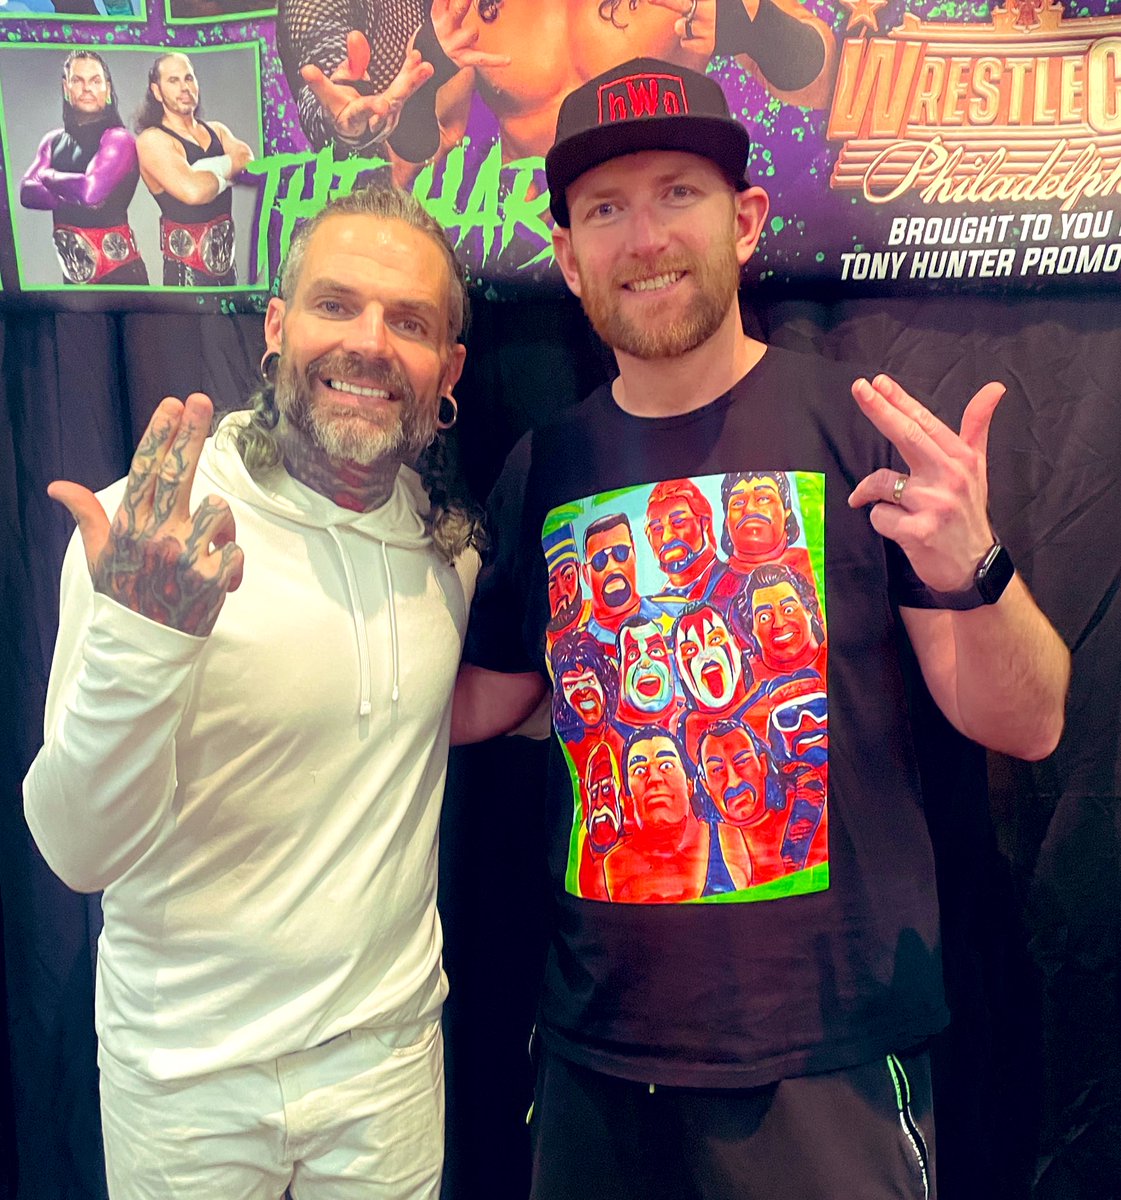 🪜 #hWoFigureFriday 🪜 Awesome to meet @JEFFHARDYBRAND at @wrestlecon in Philly and get my Retro signed ✍️ What a cool auto too 🔥 #hWo #WeWantRetros @hWoOfficialPage